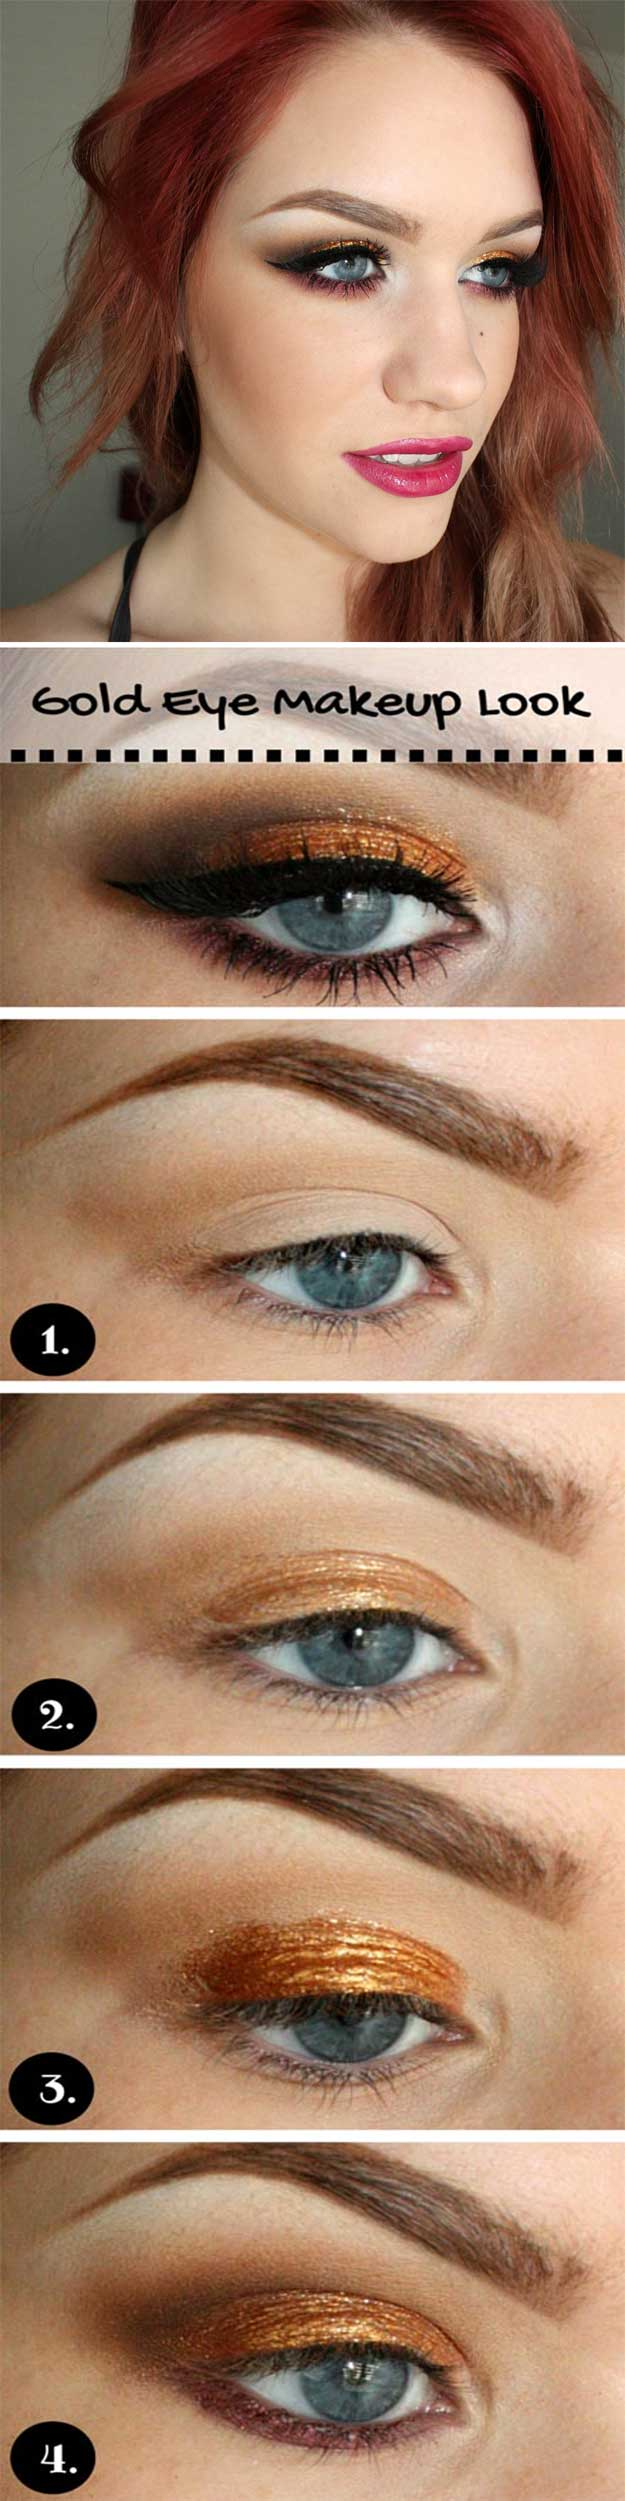 Makeup Tips For Fair Skin And Blue Eyes 35 Wedding Makeup For Blue Eyes The Goddess